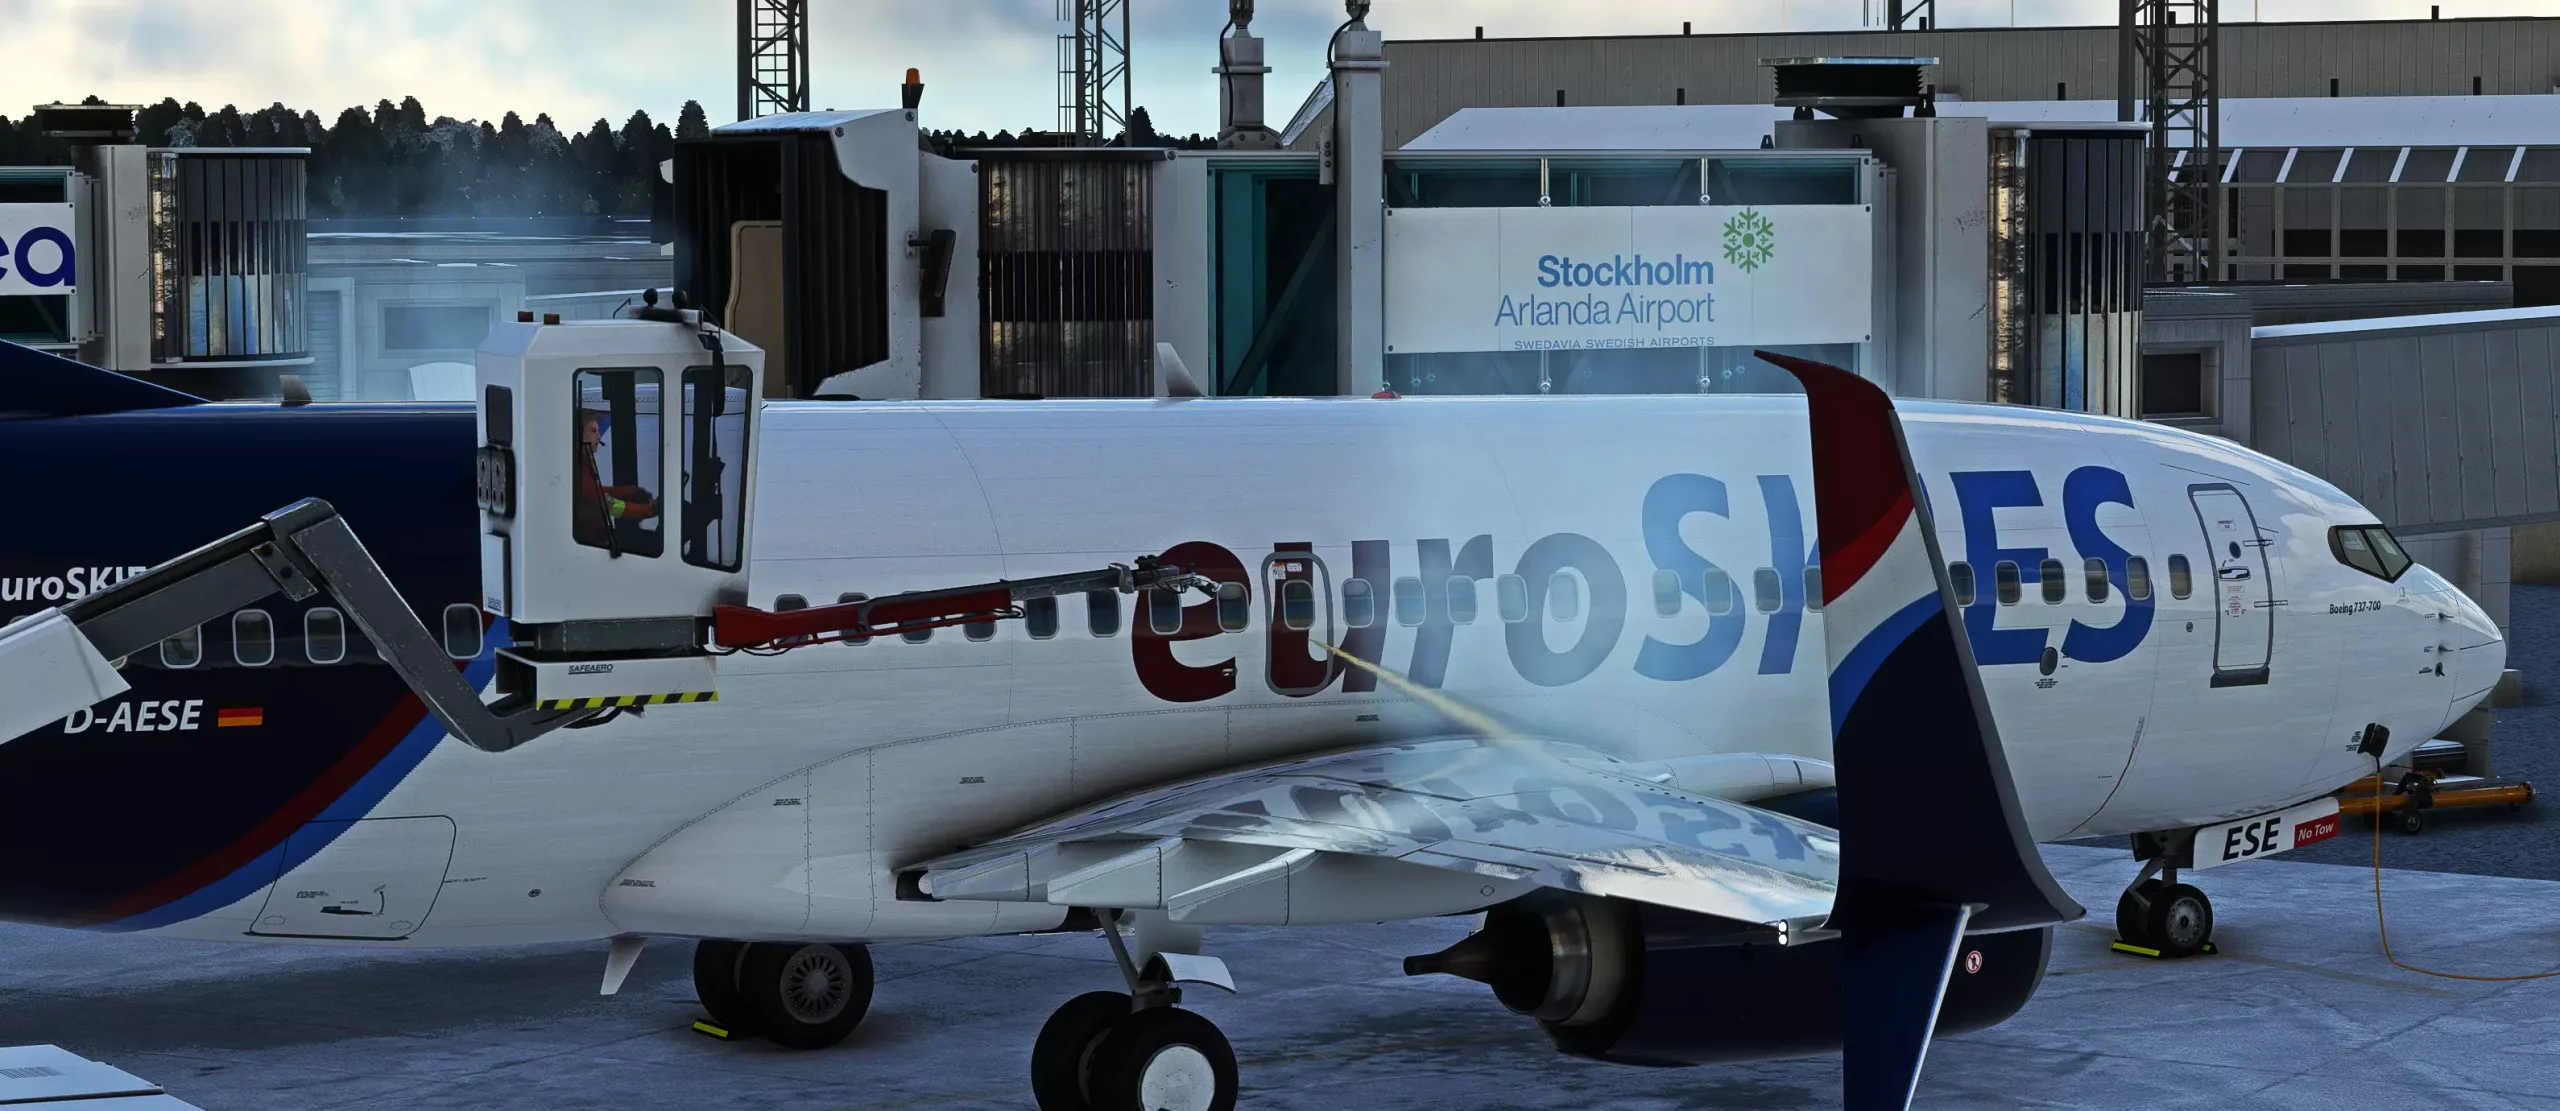 euroSKIES virtual Airline 737 during deicing